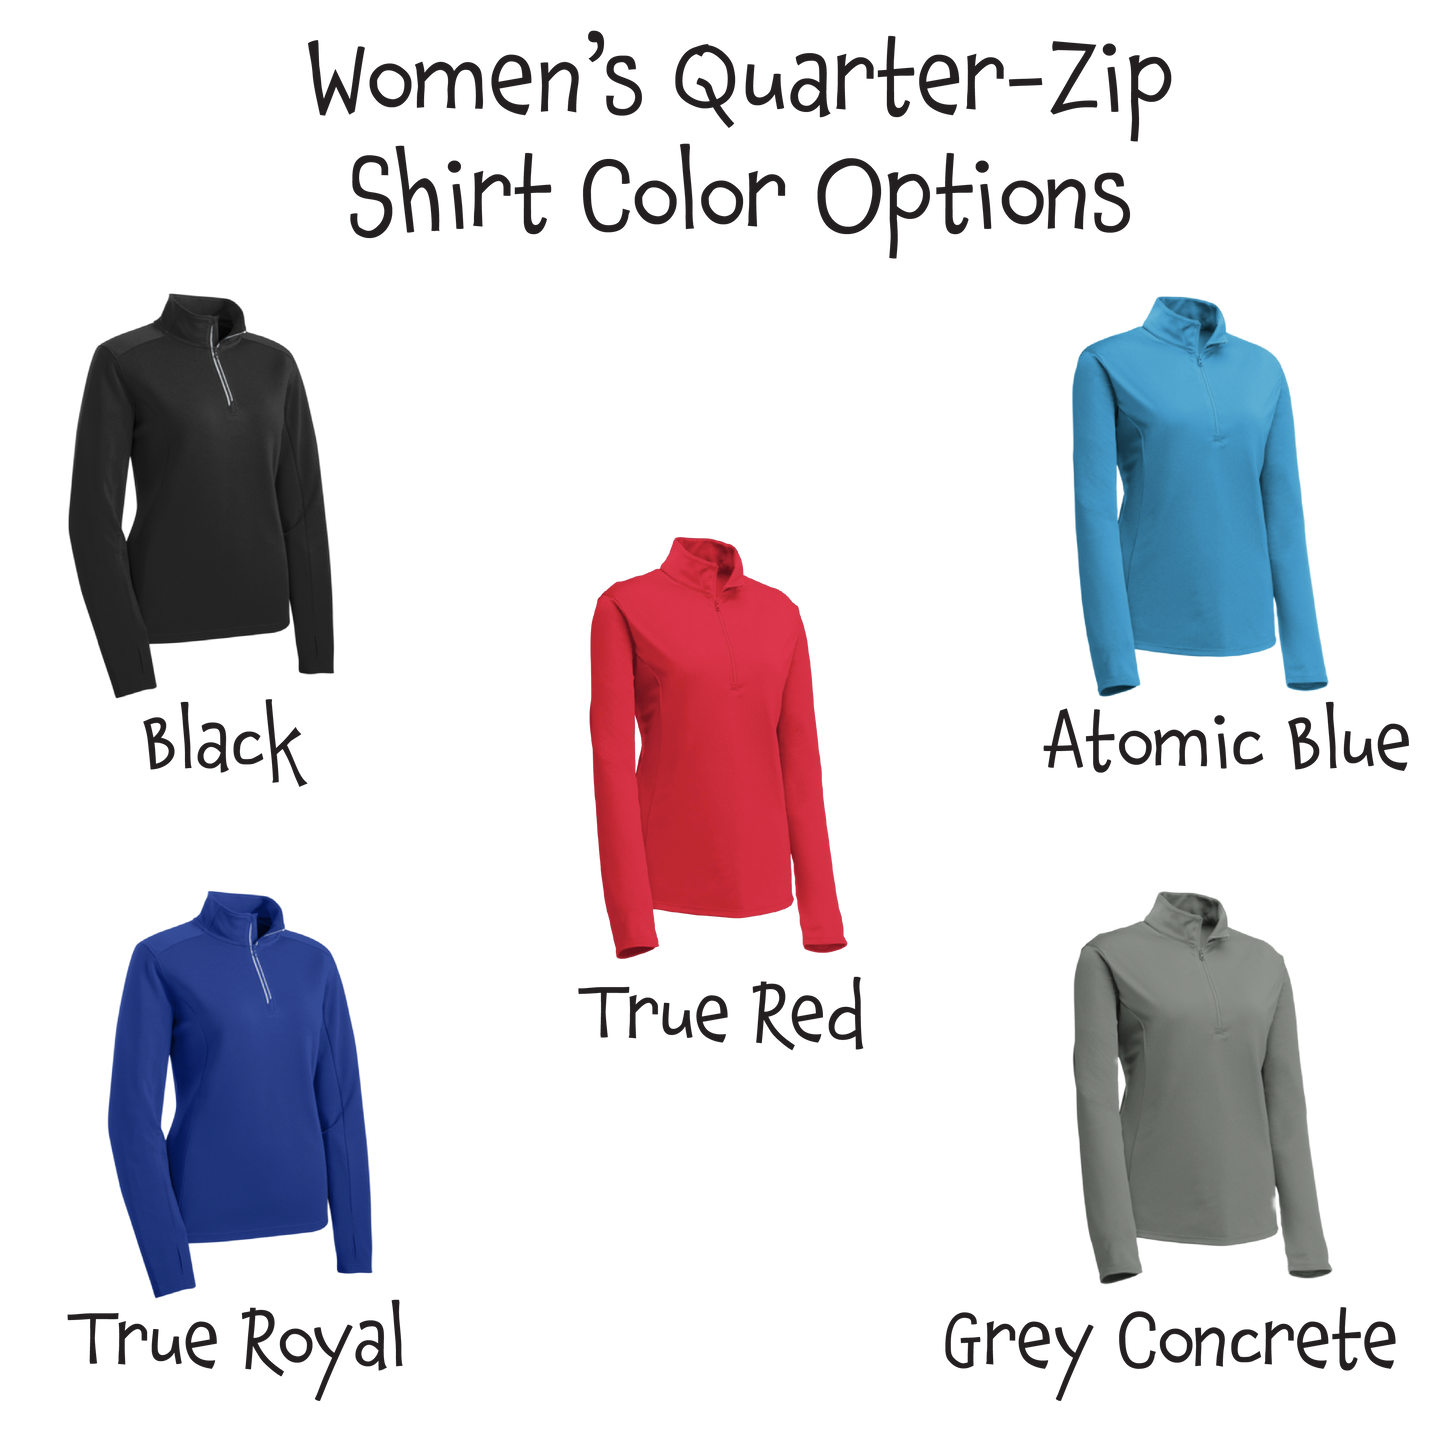 002 With Pickleballs (Patriotic Stars) | Women's 1/4 Zip Pullover Athletic Shirt | 100% Polyester